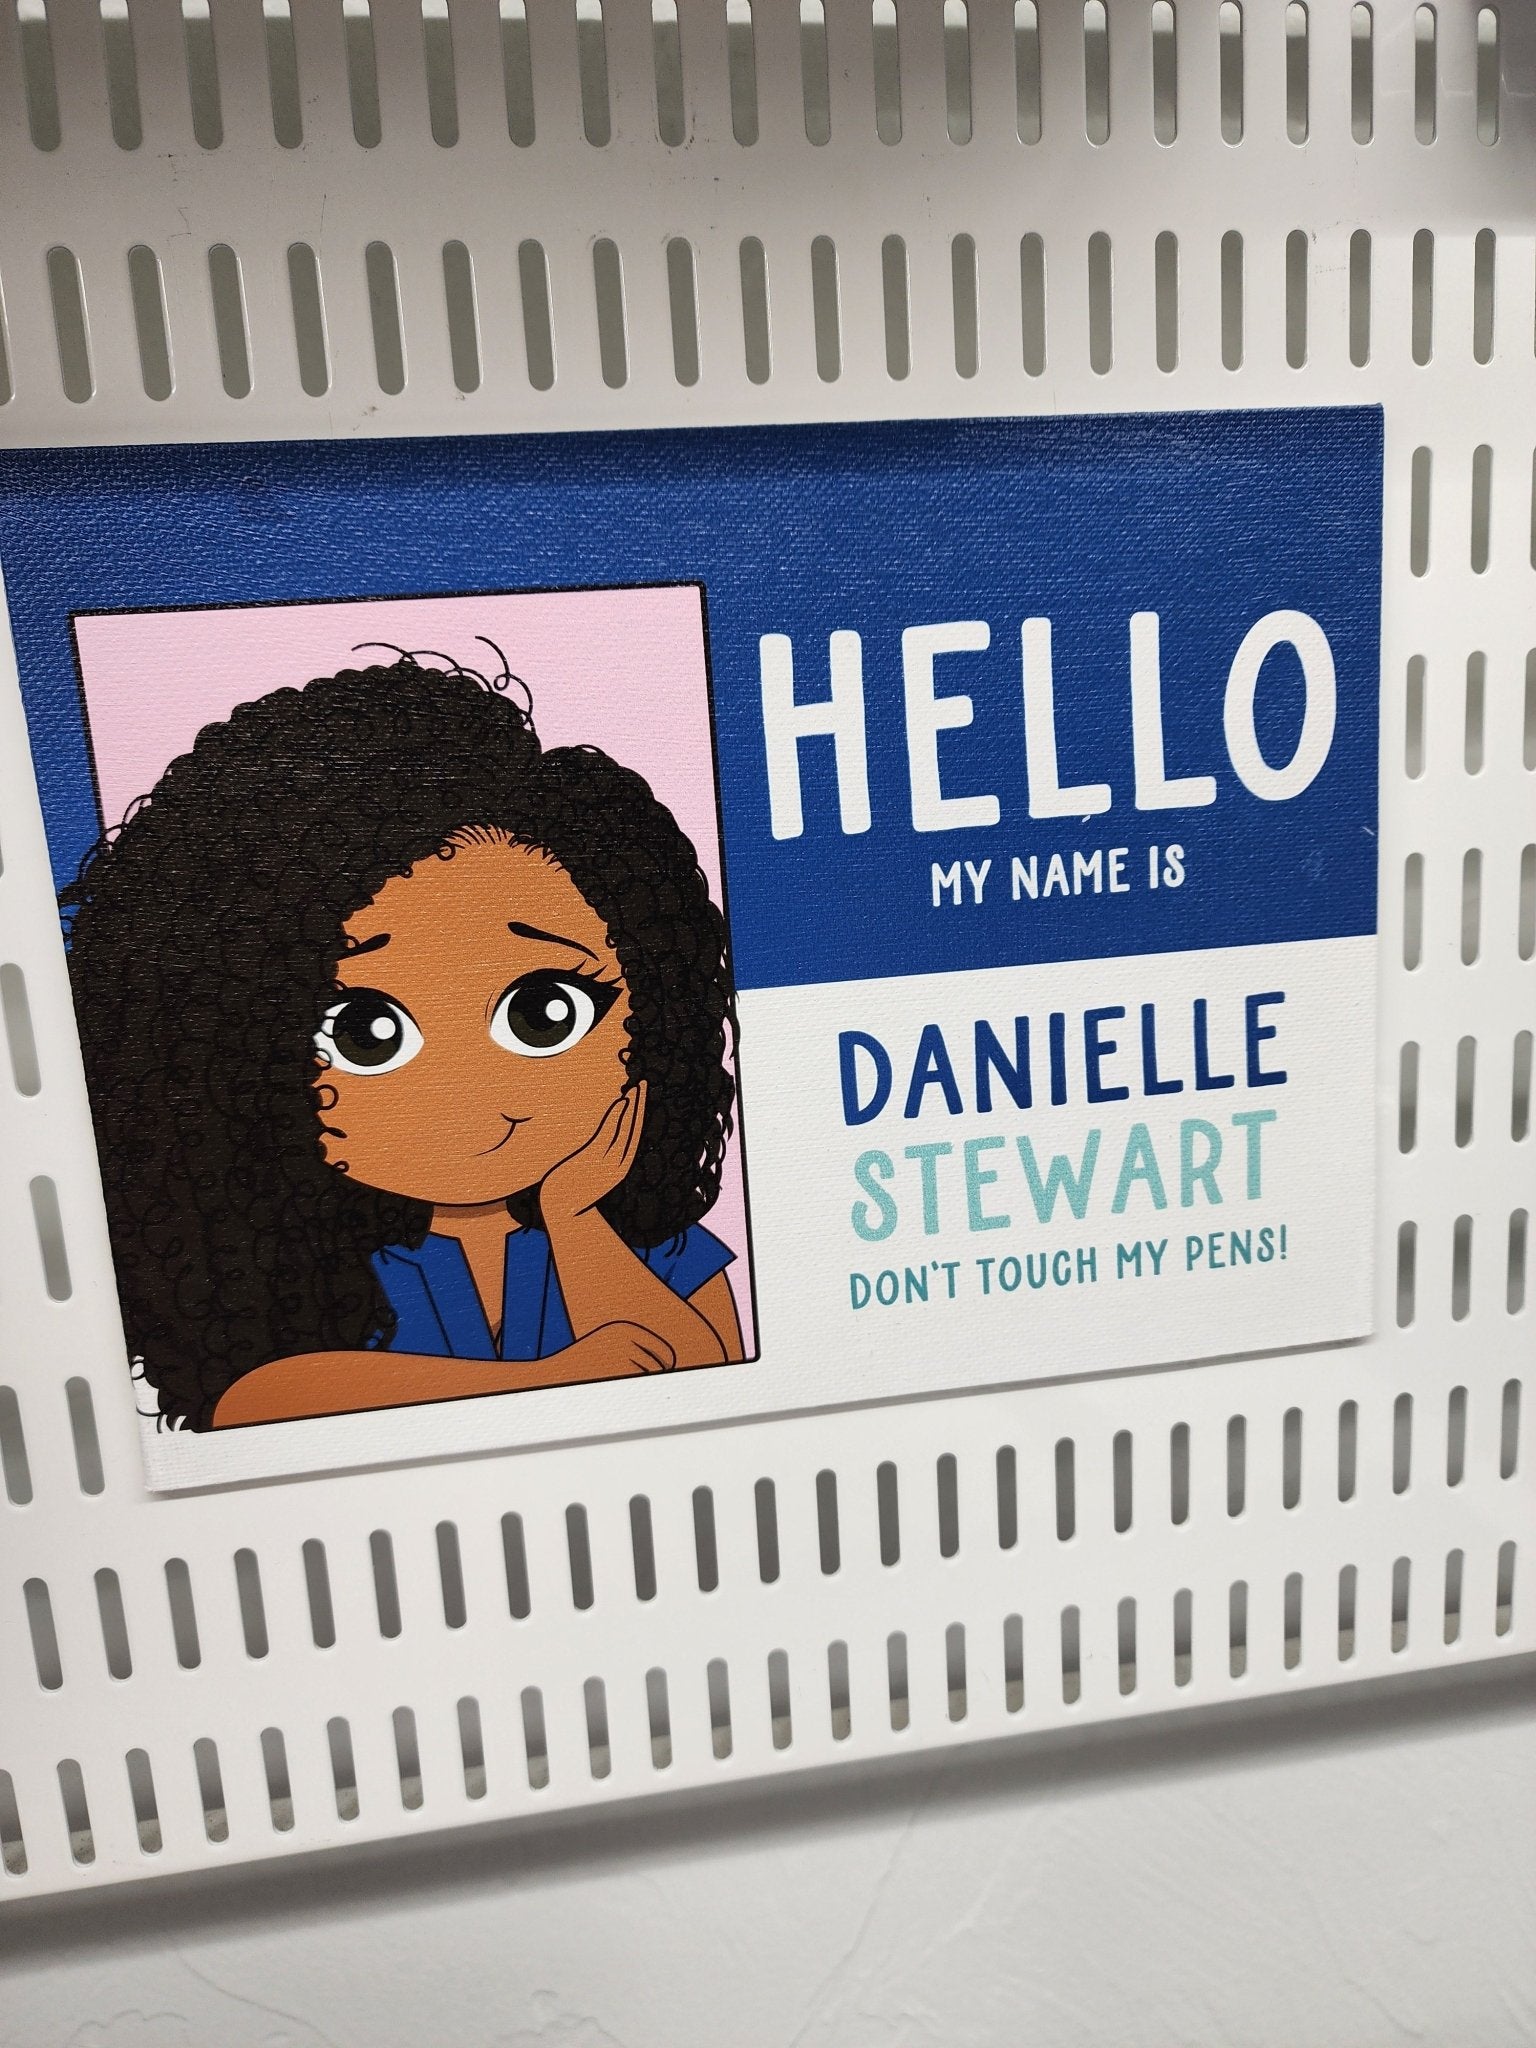 Hello My Name is Personalized Canvas Art - 8 x 6 - ohsopaper